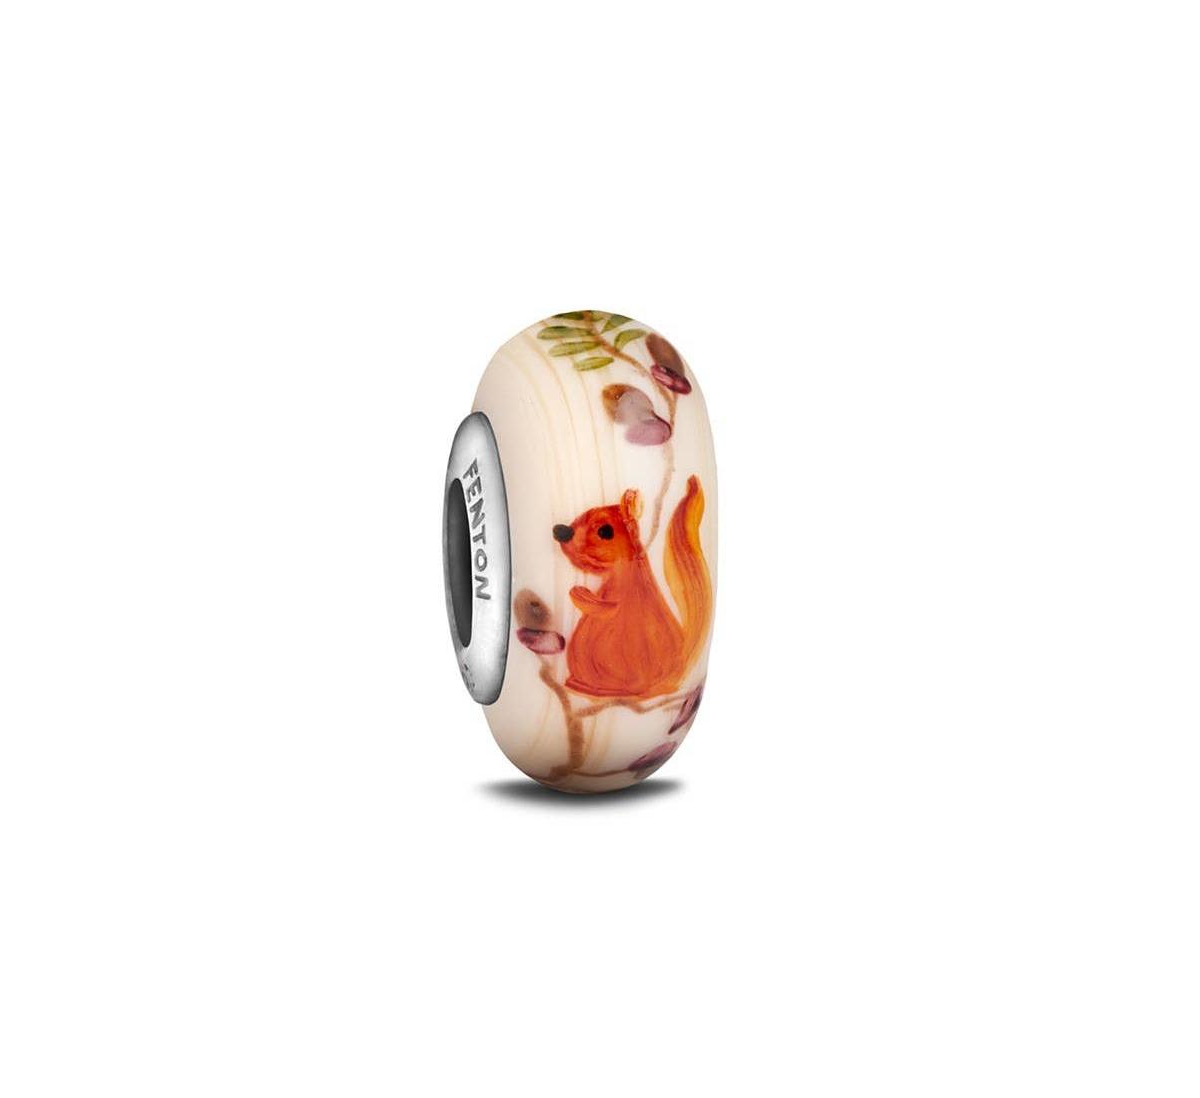 "Scamper" Hand Decorated Glass Bead - Light/pastel brown